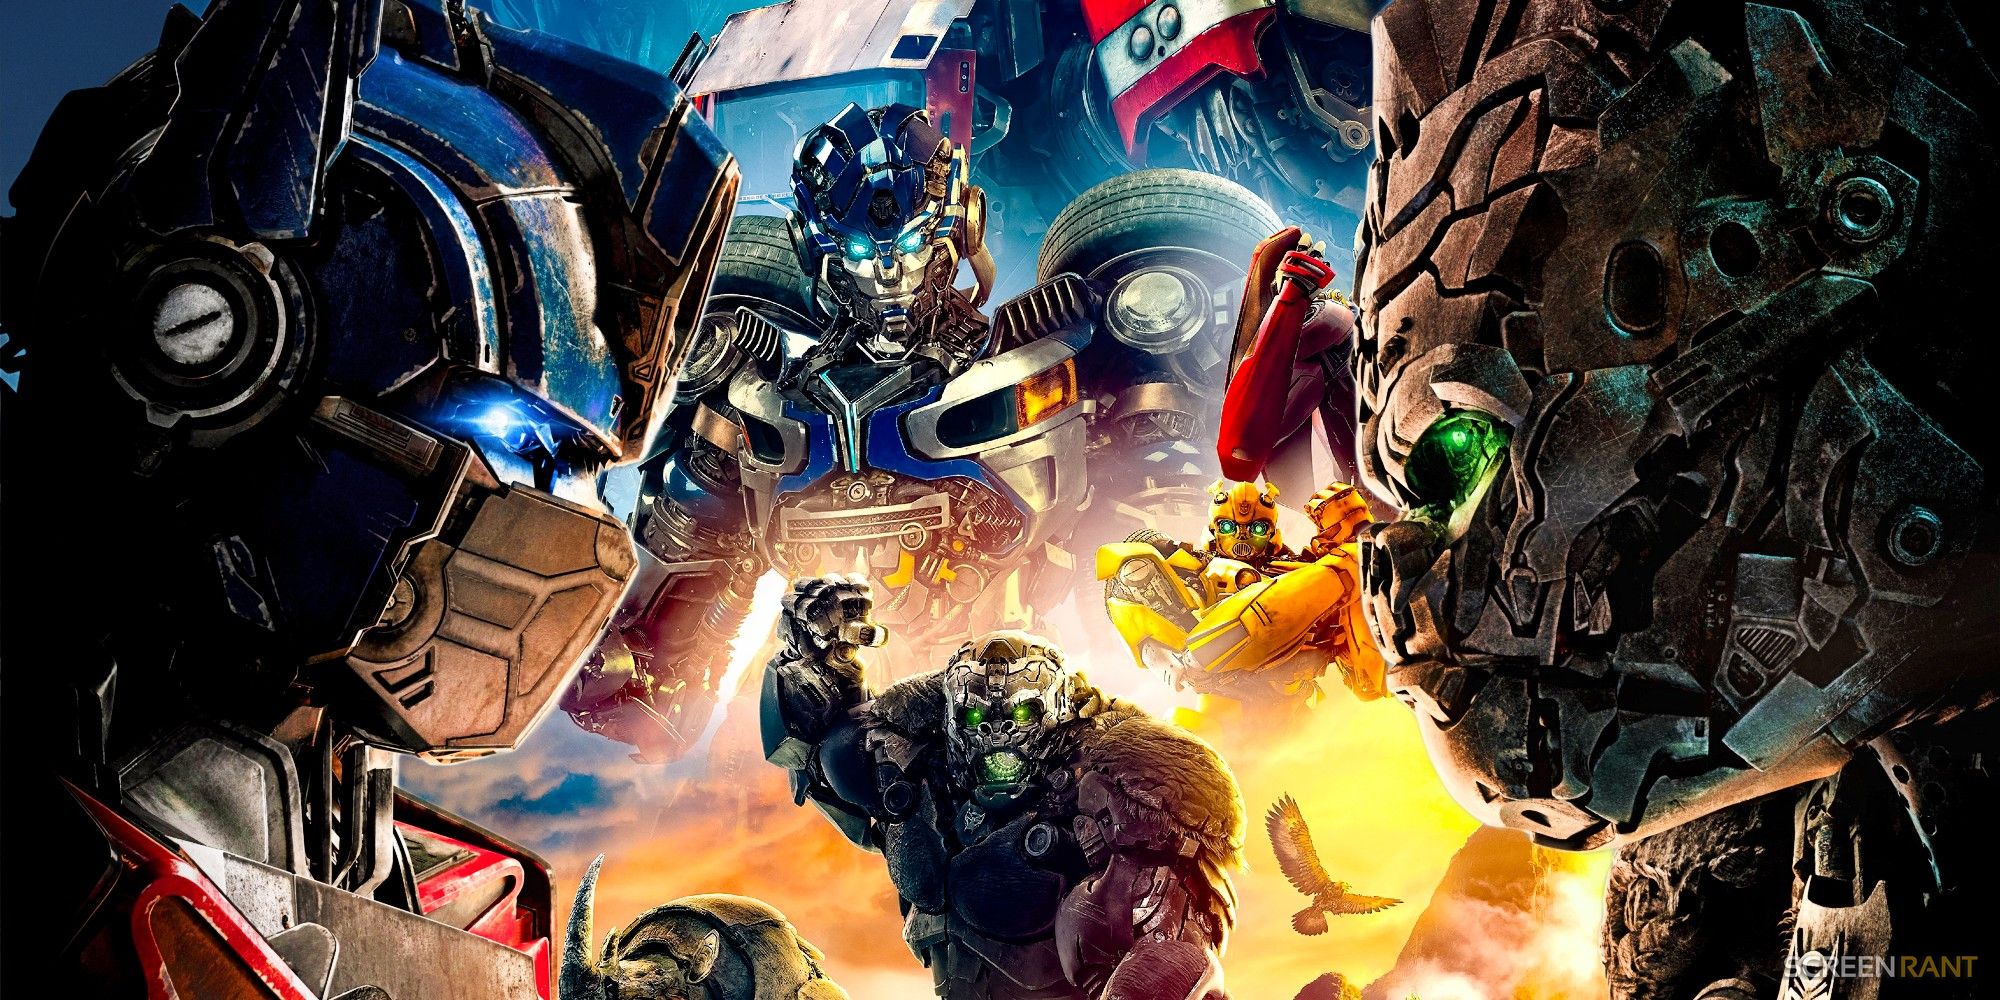 Transformers - Franchise - Rotten Tomatoes